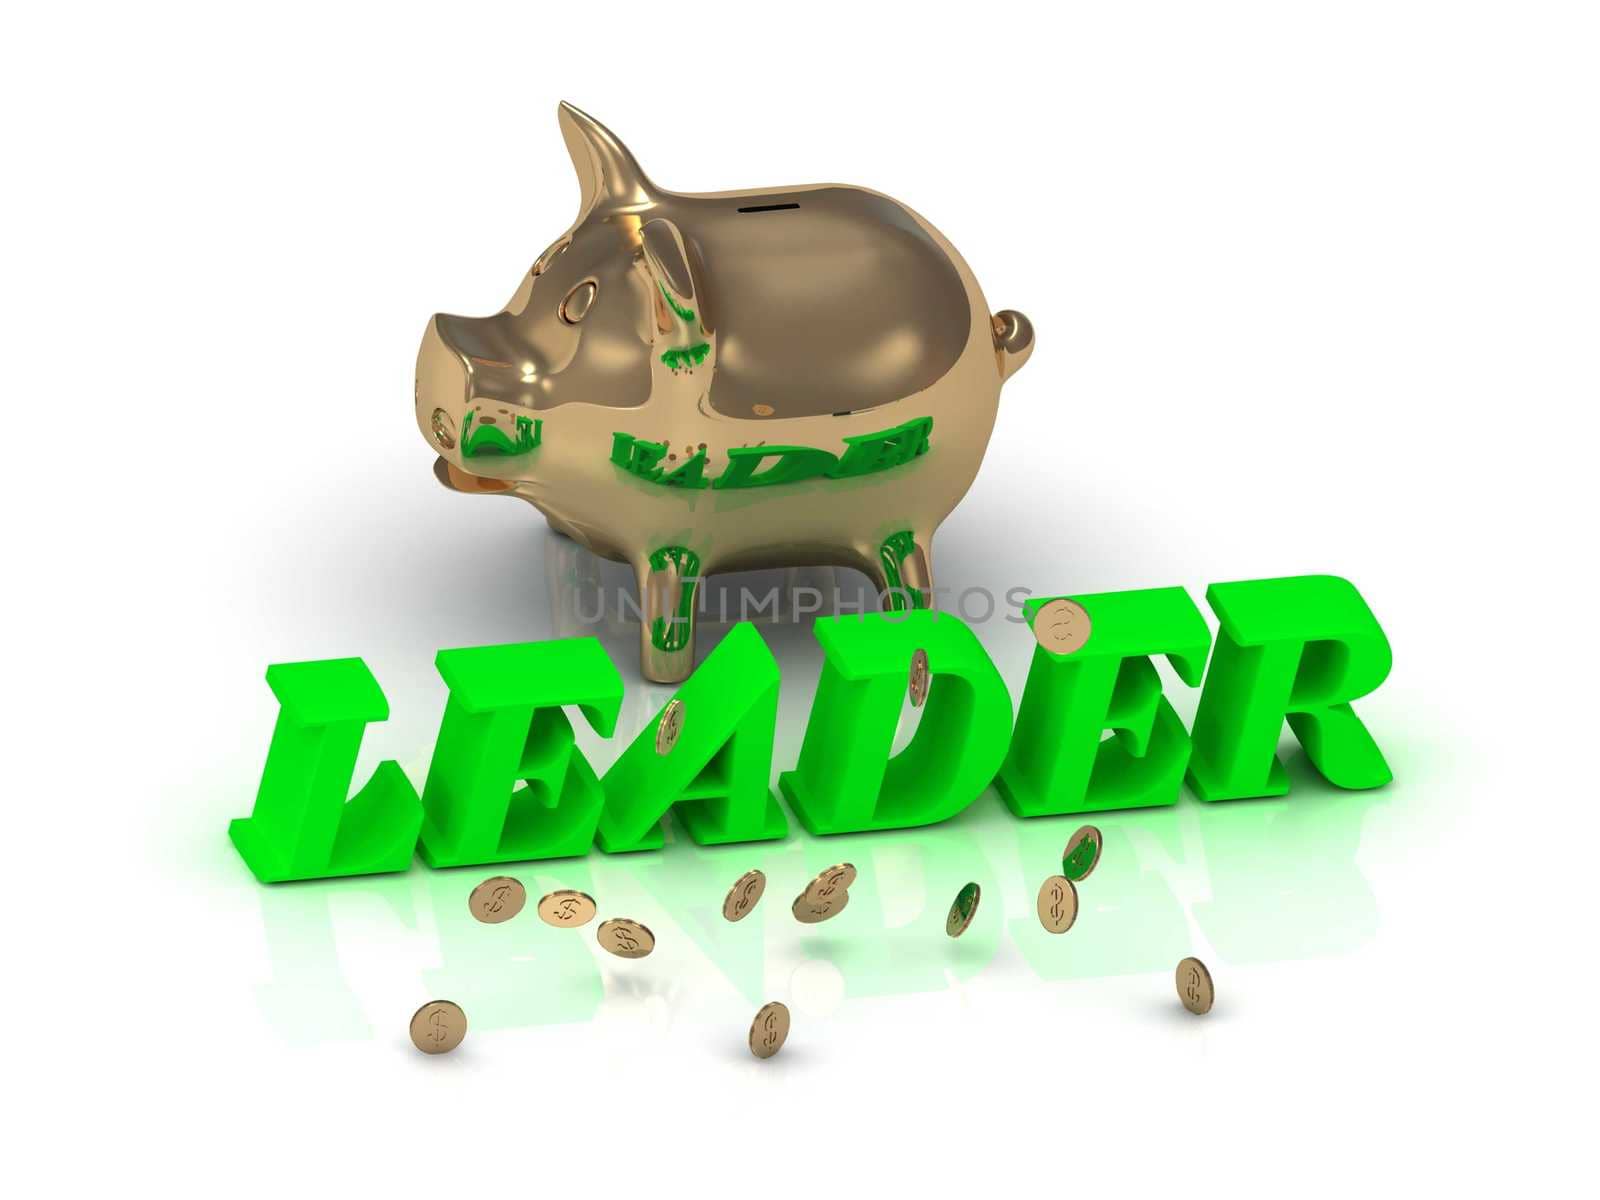 LEADER- inscription of green letters and gold Piggy by GreenMost